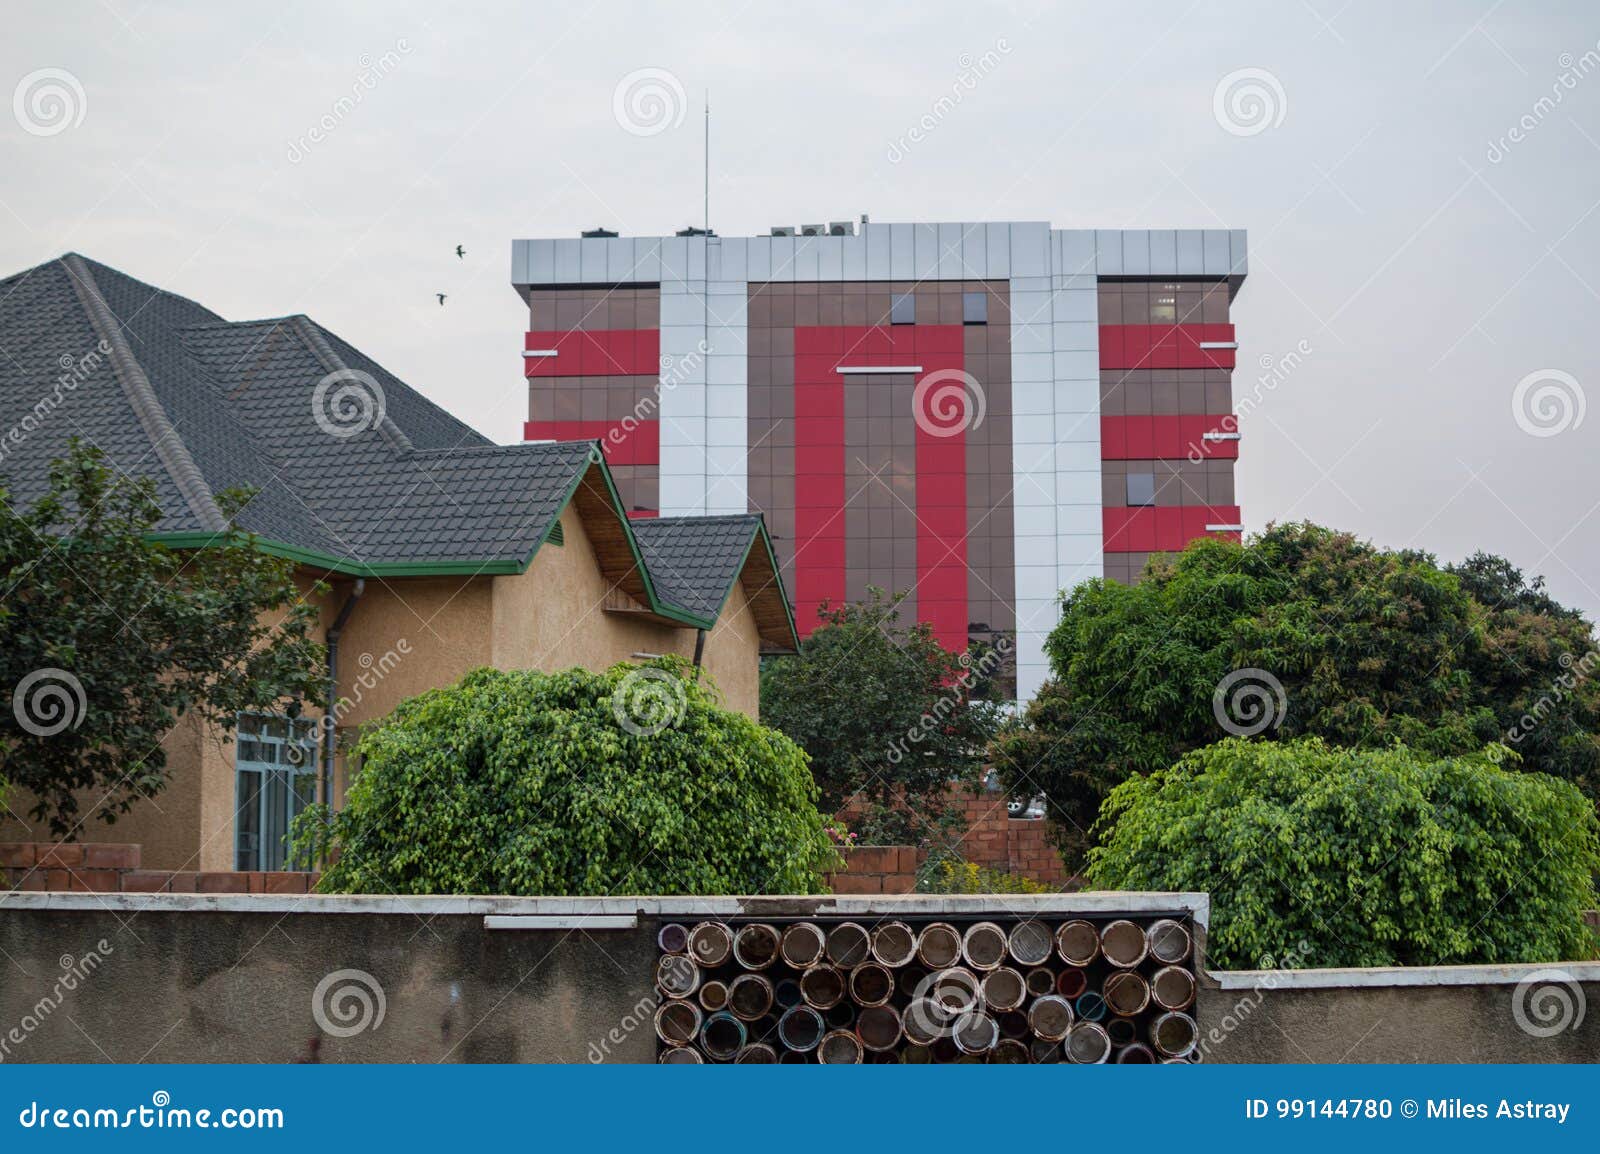 residential house and office building in kigali, rwanda